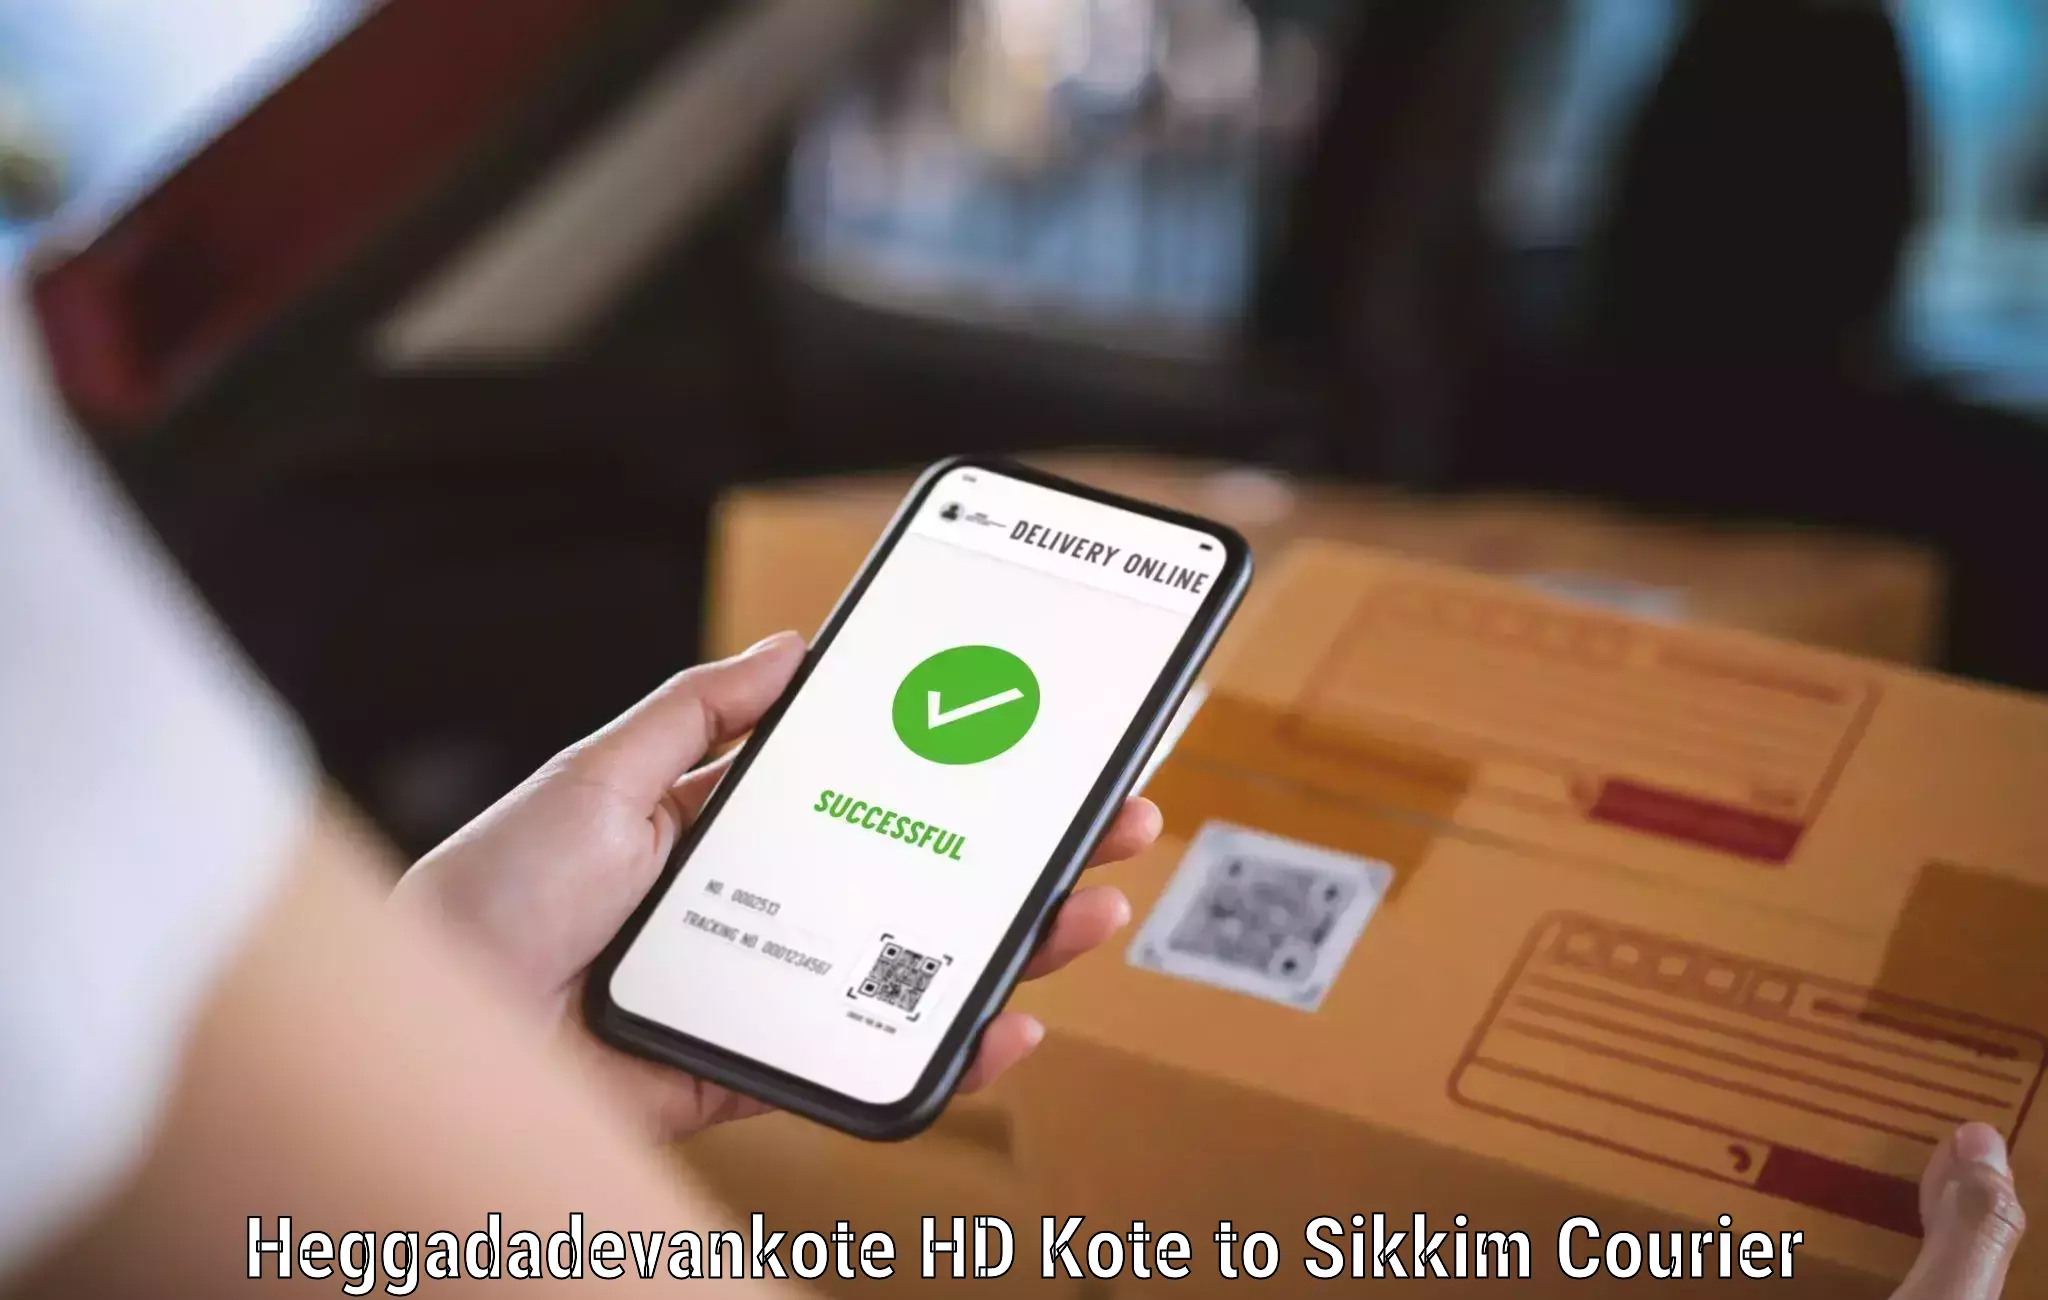 Holiday shipping services Heggadadevankote HD Kote to South Sikkim